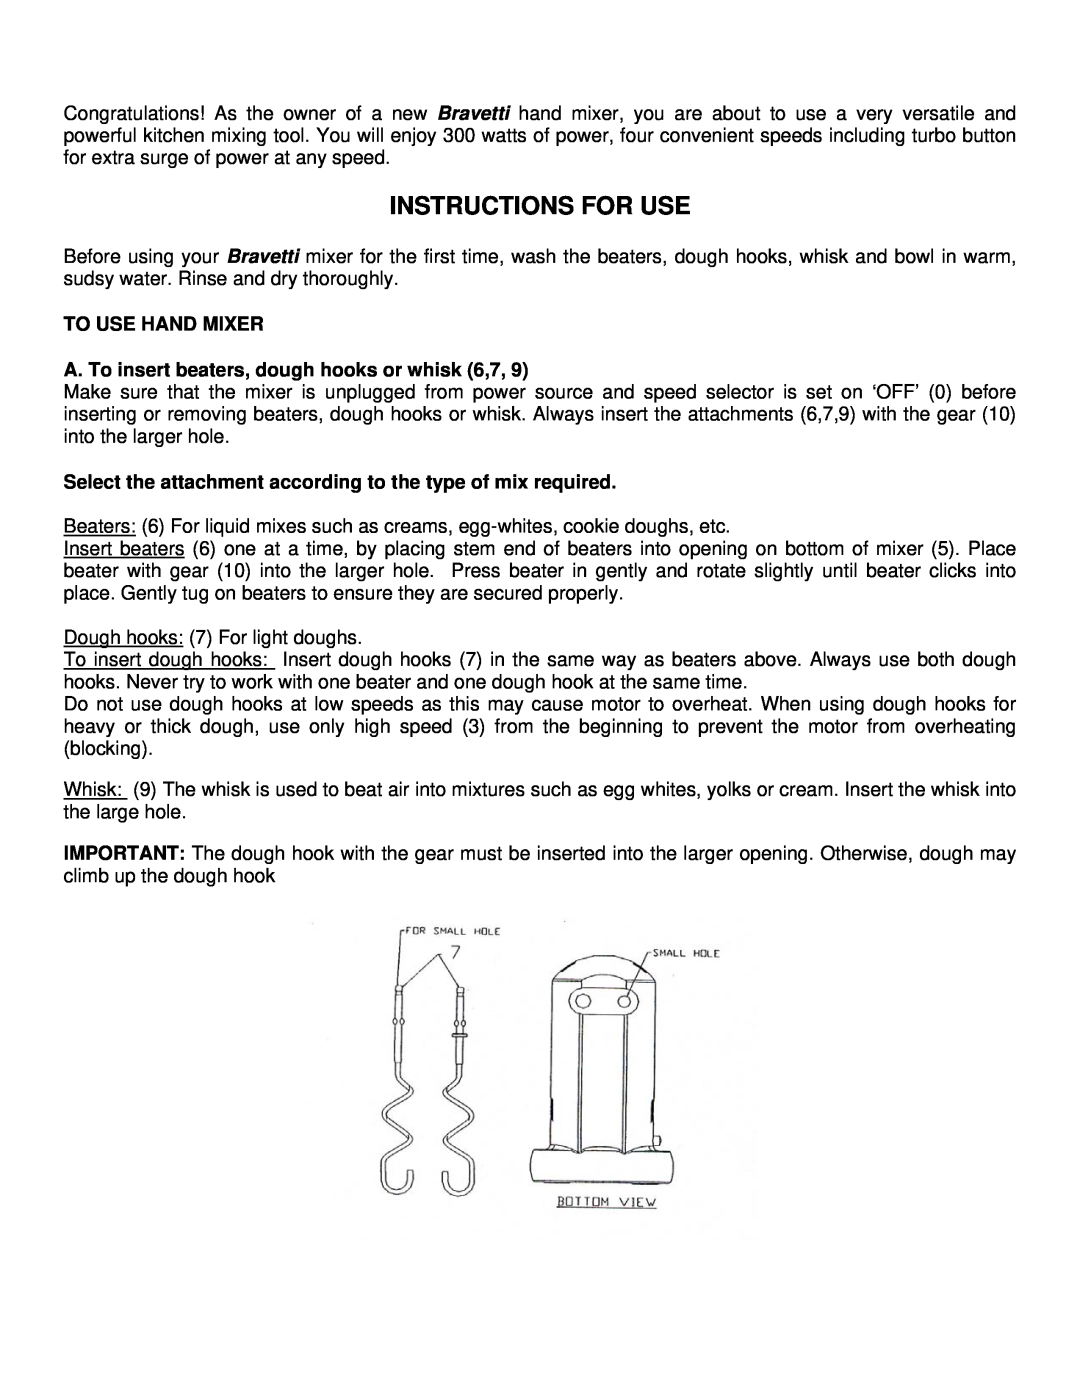 Bravetti EP545 manual Instructions For Use, To Use Hand Mixer, A. To insert beaters, dough hooks or whisk 6,7 